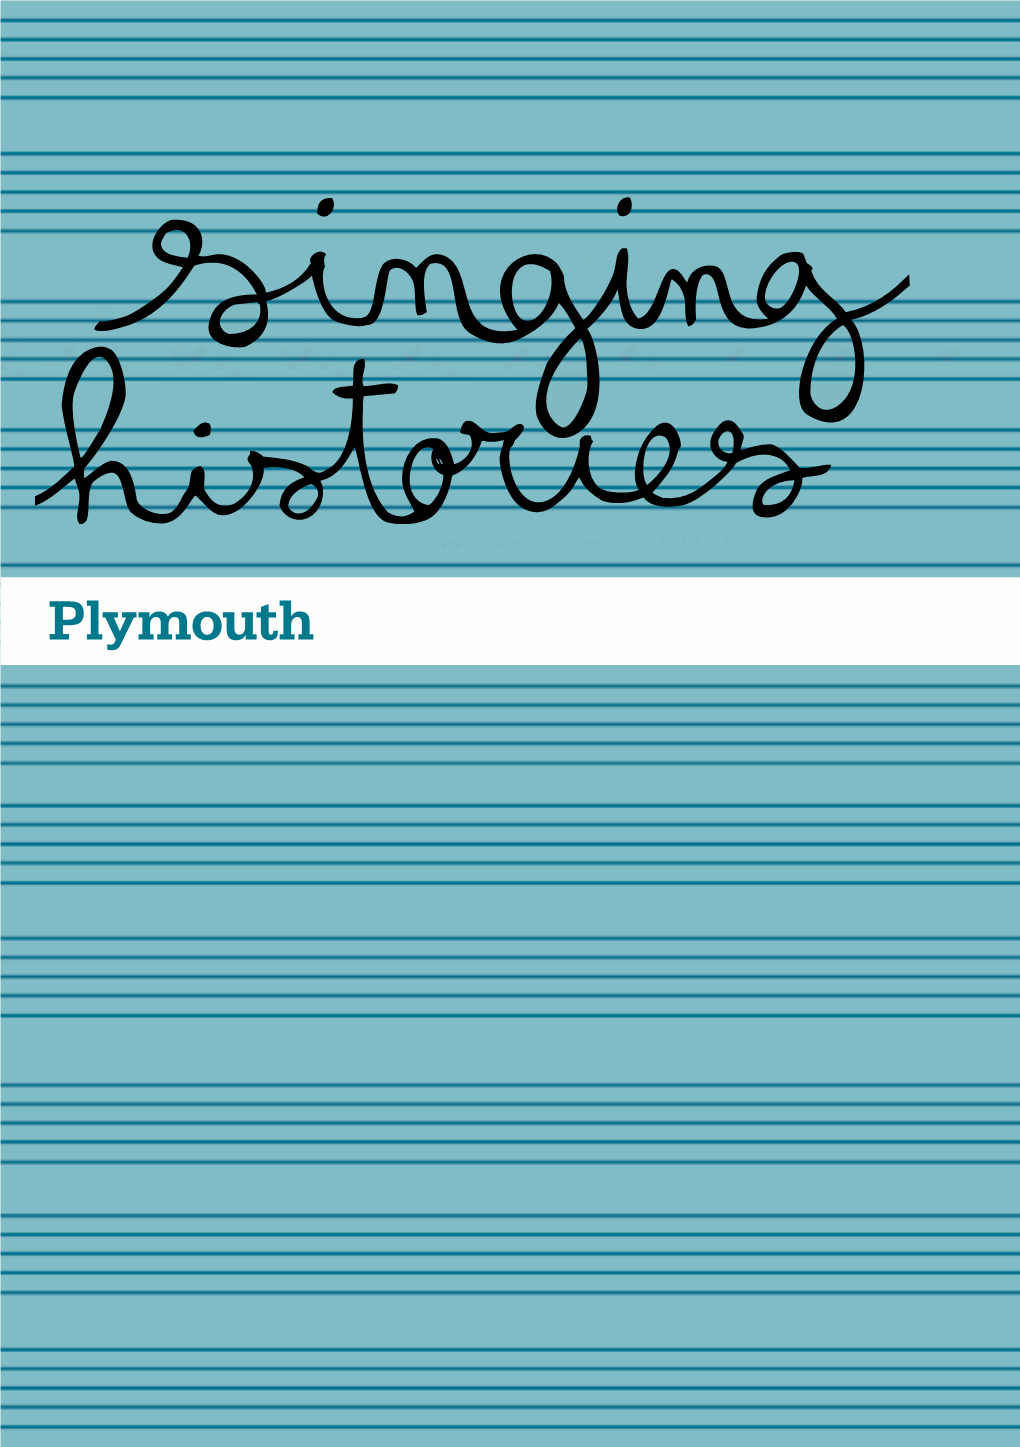 Plymouth Contents